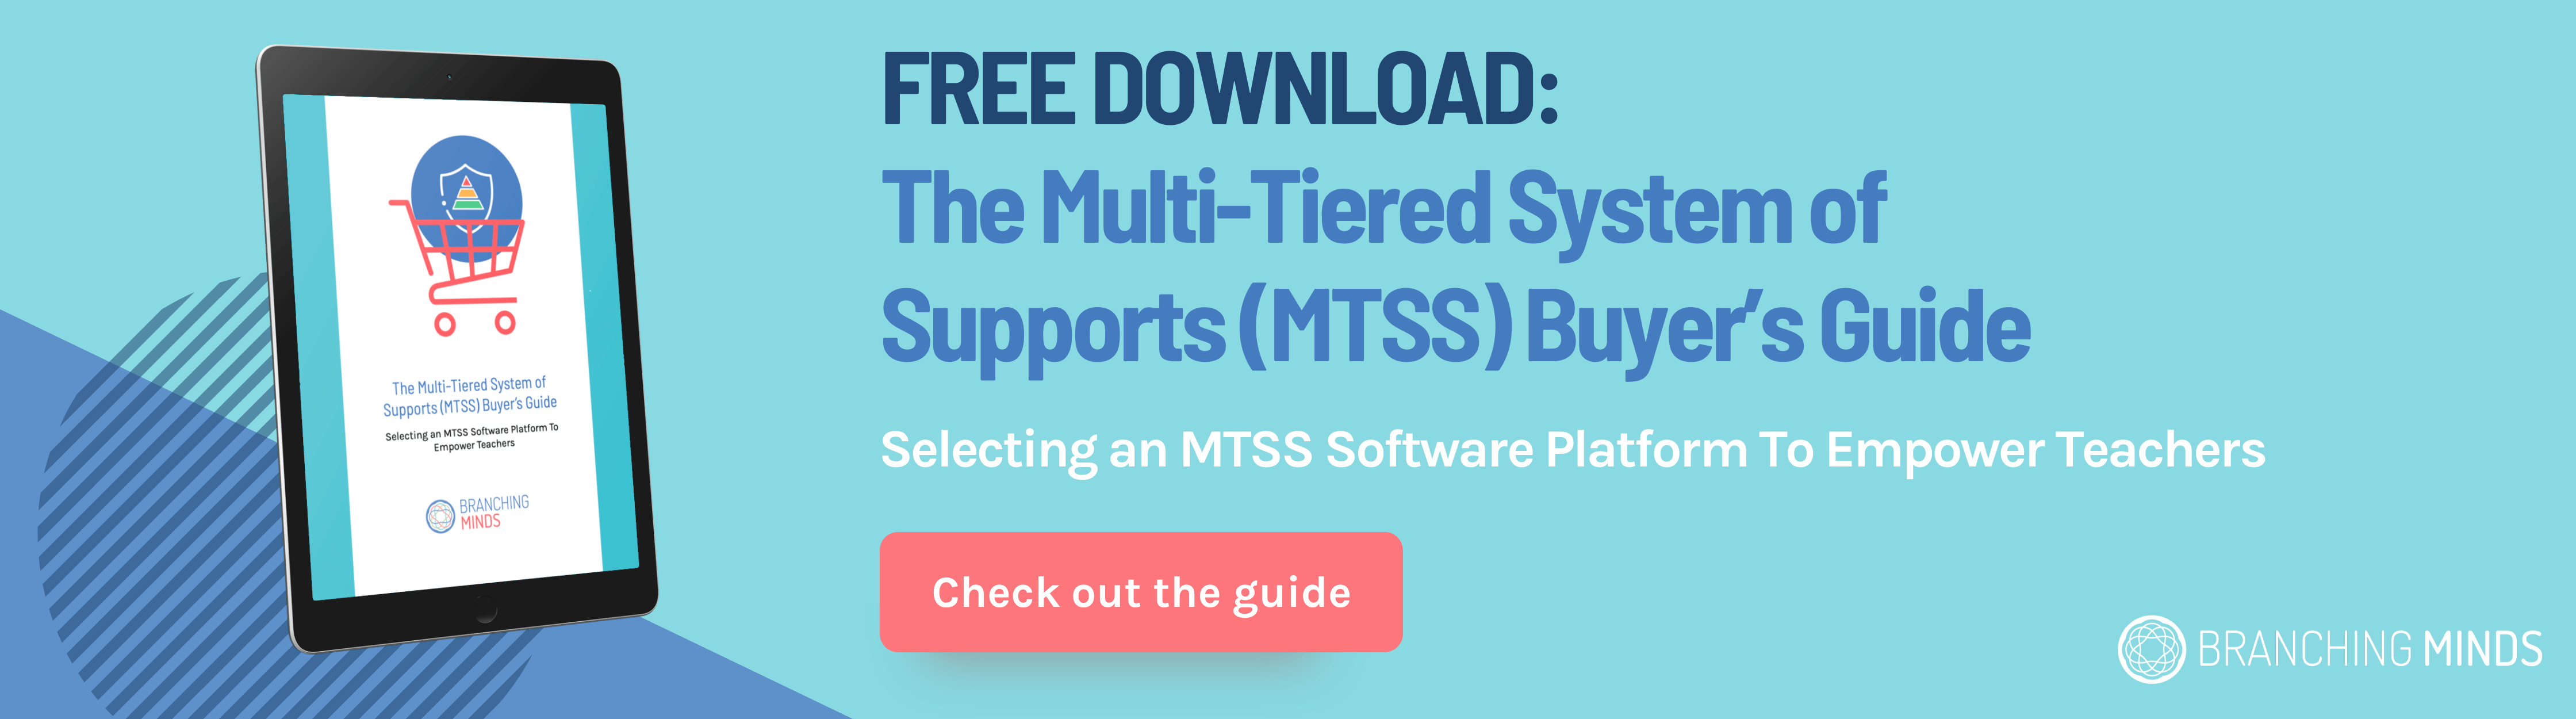 mtss-buyers-guide-branching-minds-brm